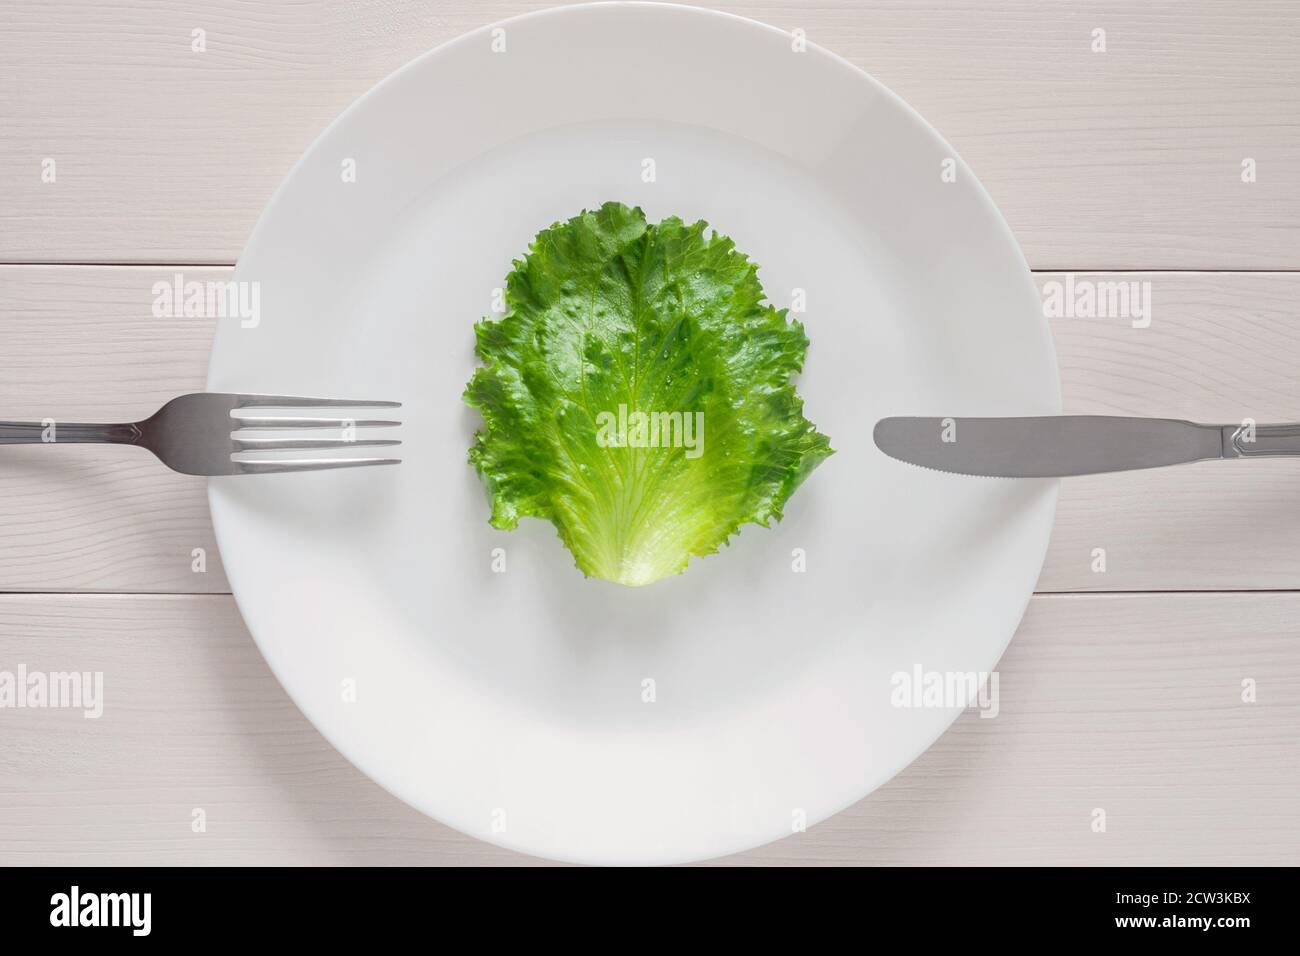 leaf lettuce on white plate with fork and knife, mono diet for weight loss Stock Photo